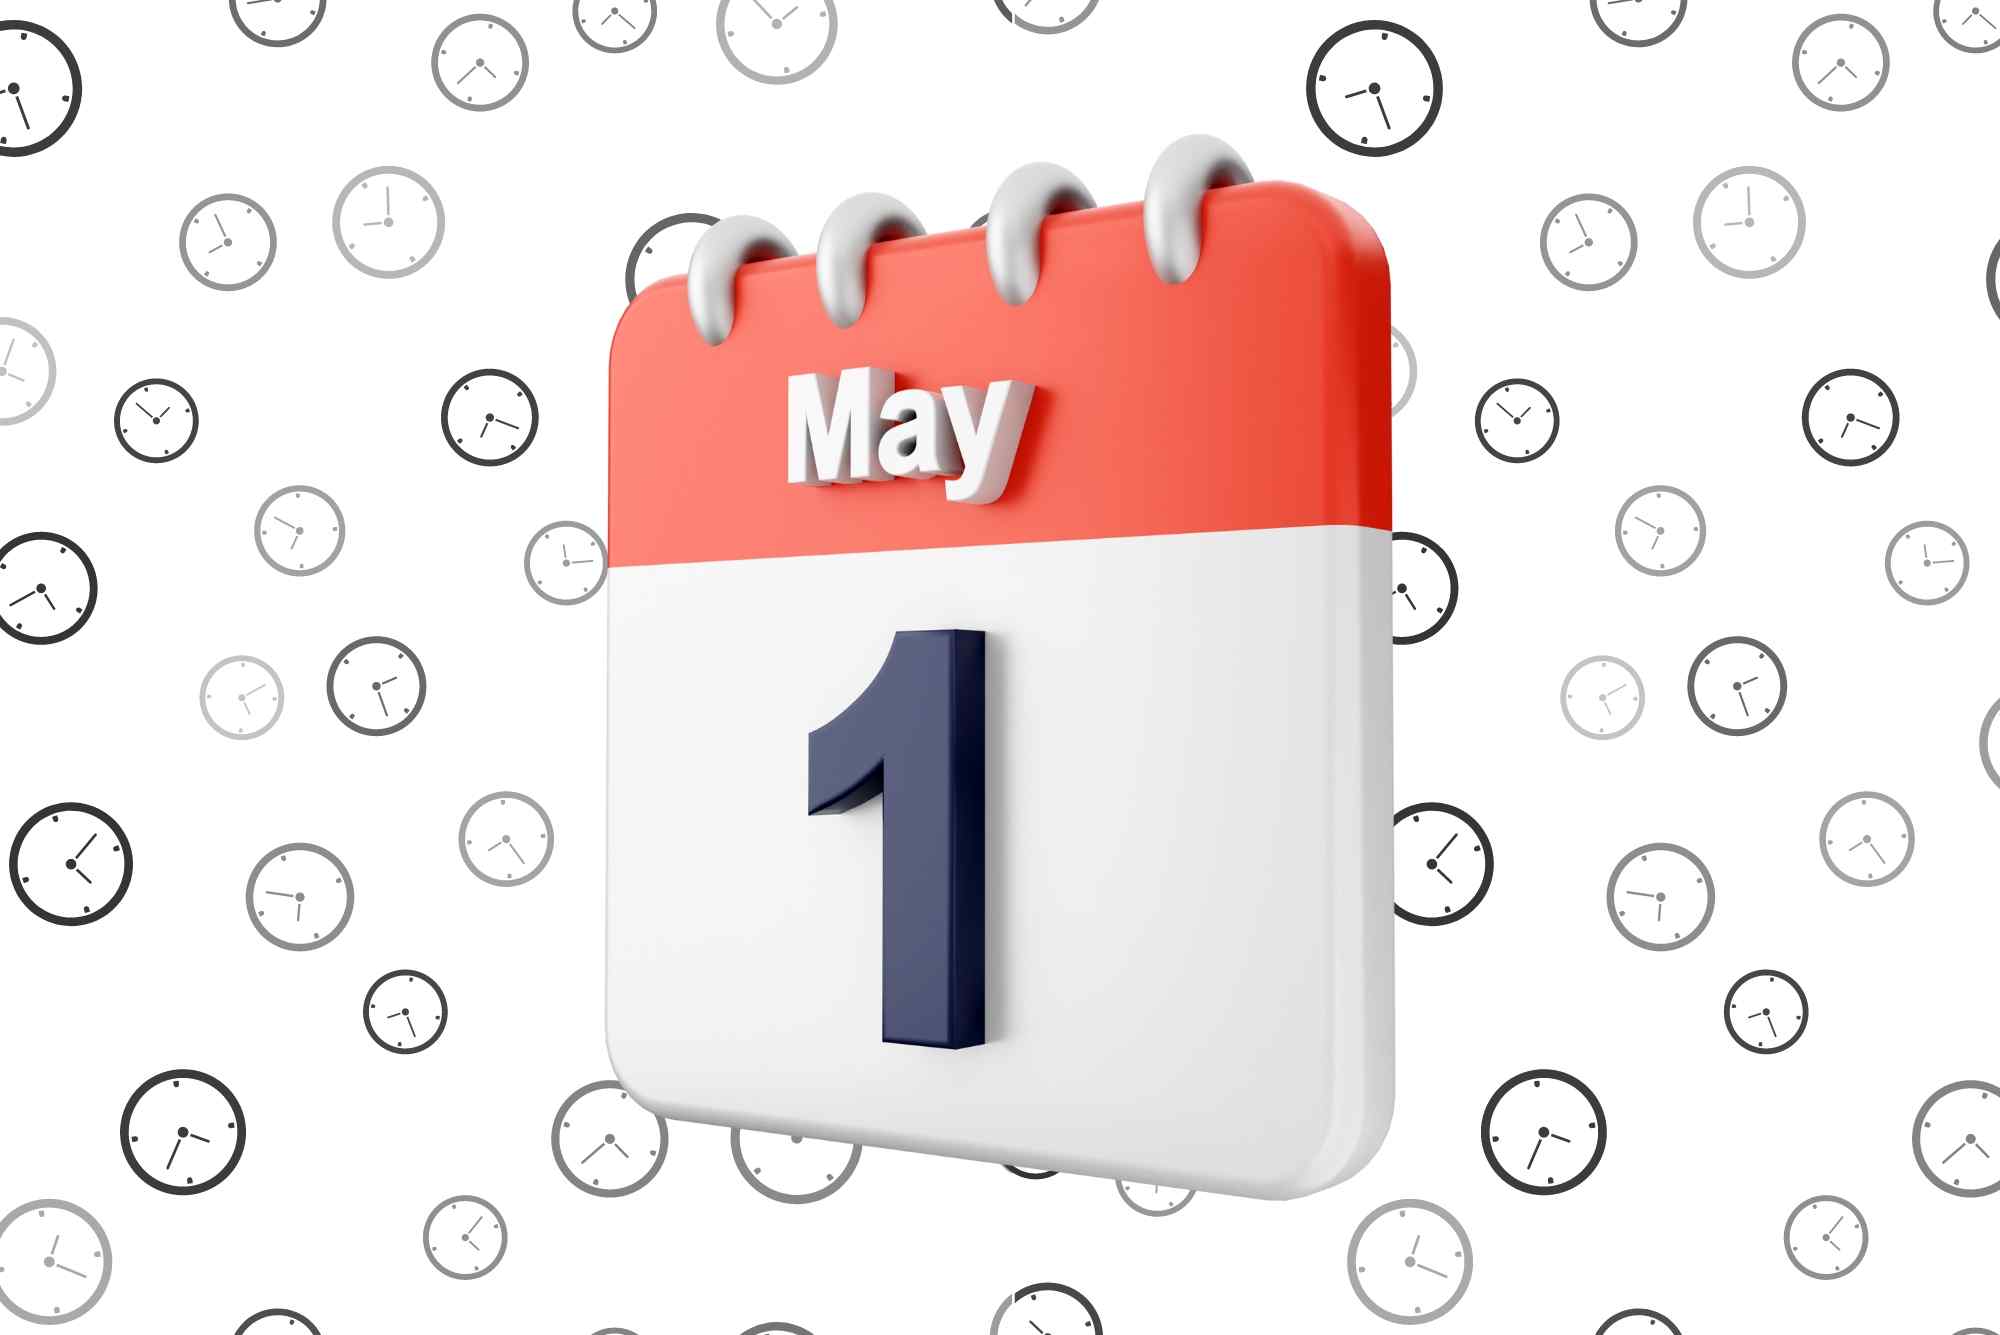 Calendar displaying the date May 1